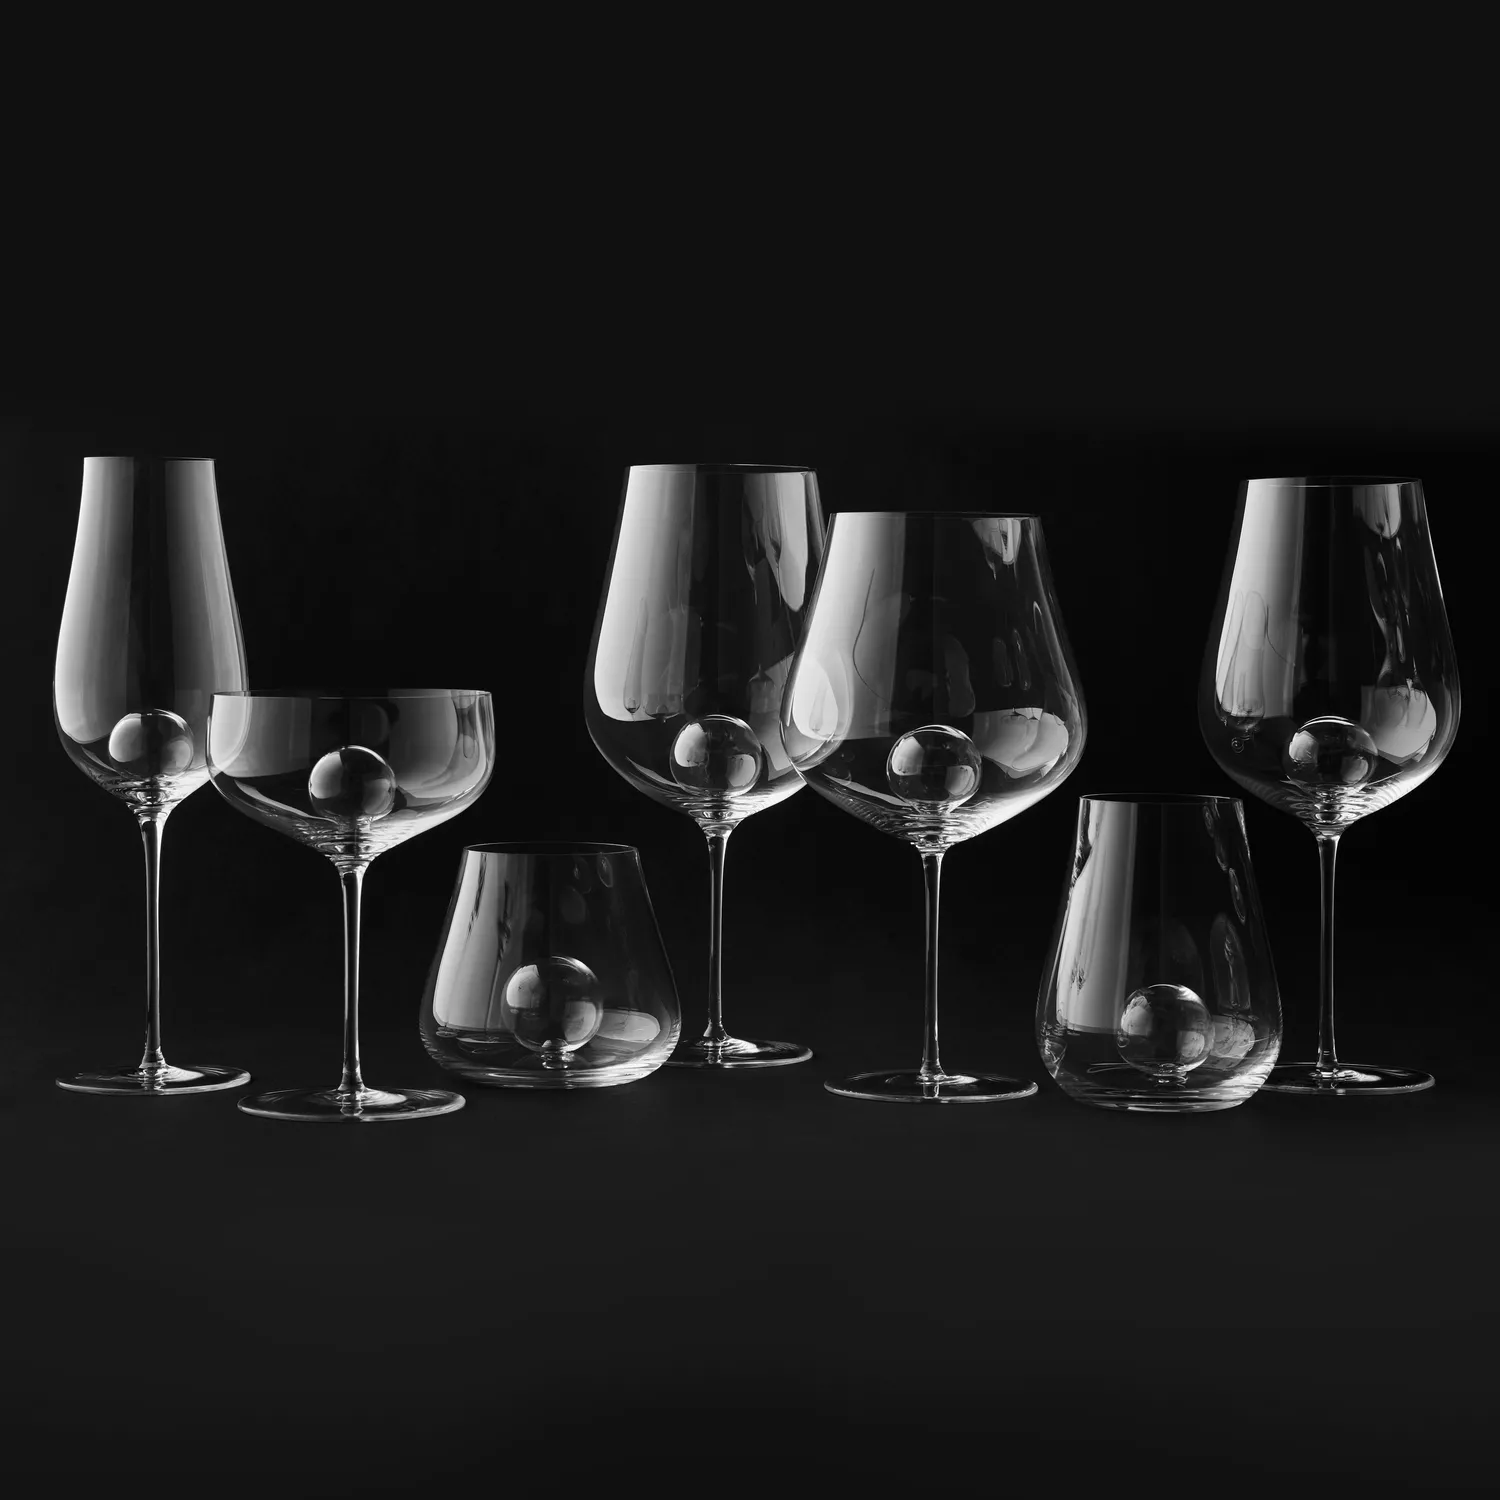 Table 12 5.8-Ounce Mini Coupe Cocktail Glasses, Glass Cups Set of 4